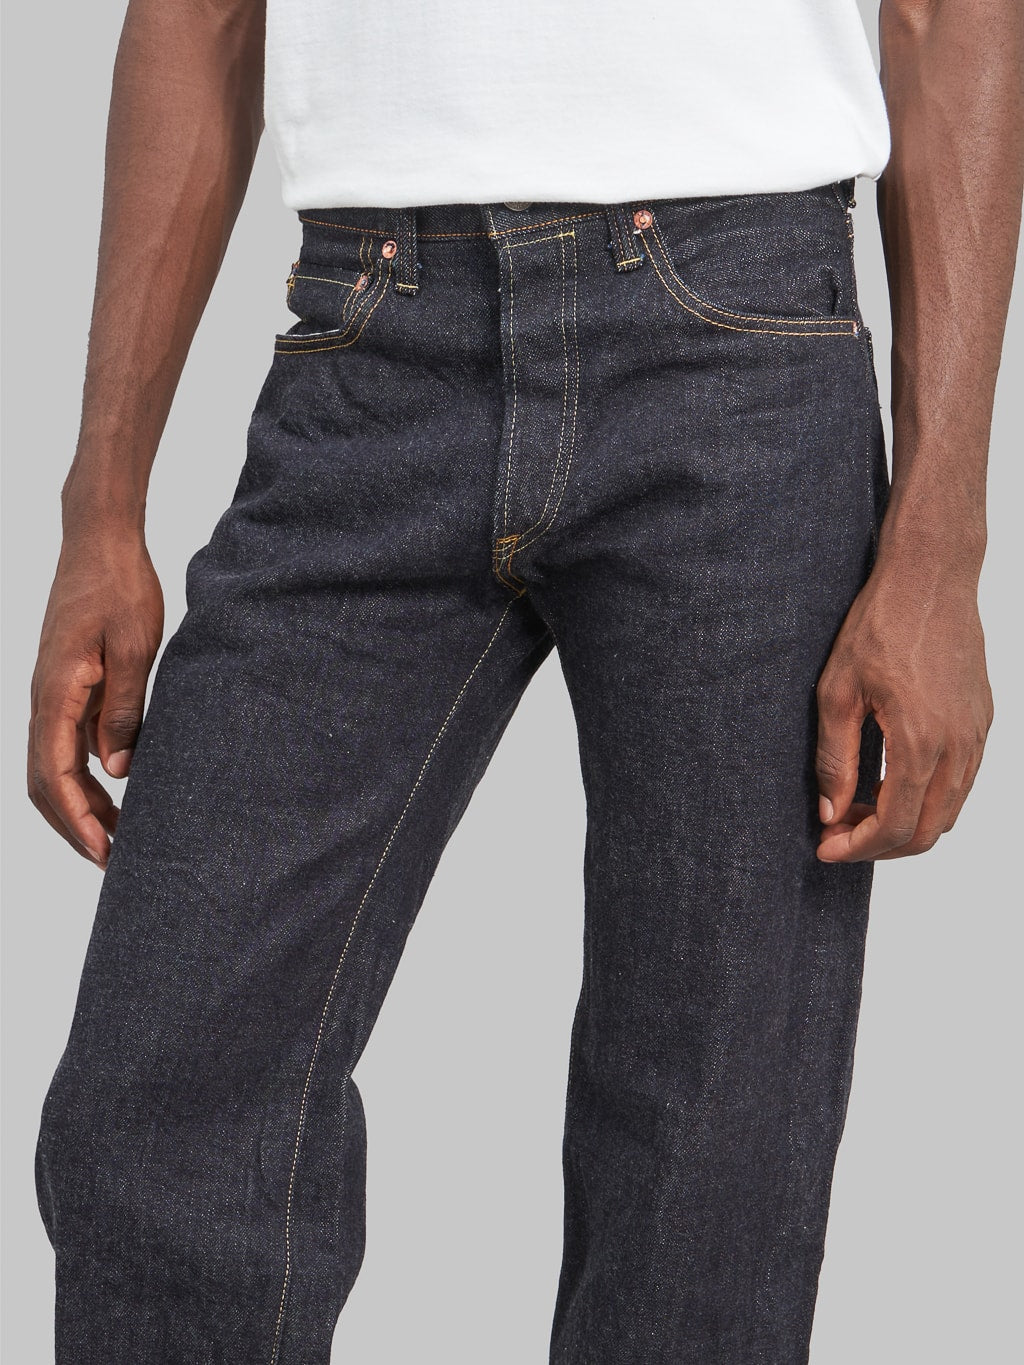 ONI Denim 200 Low Tension 15oz Wide Straight Jeans high rise